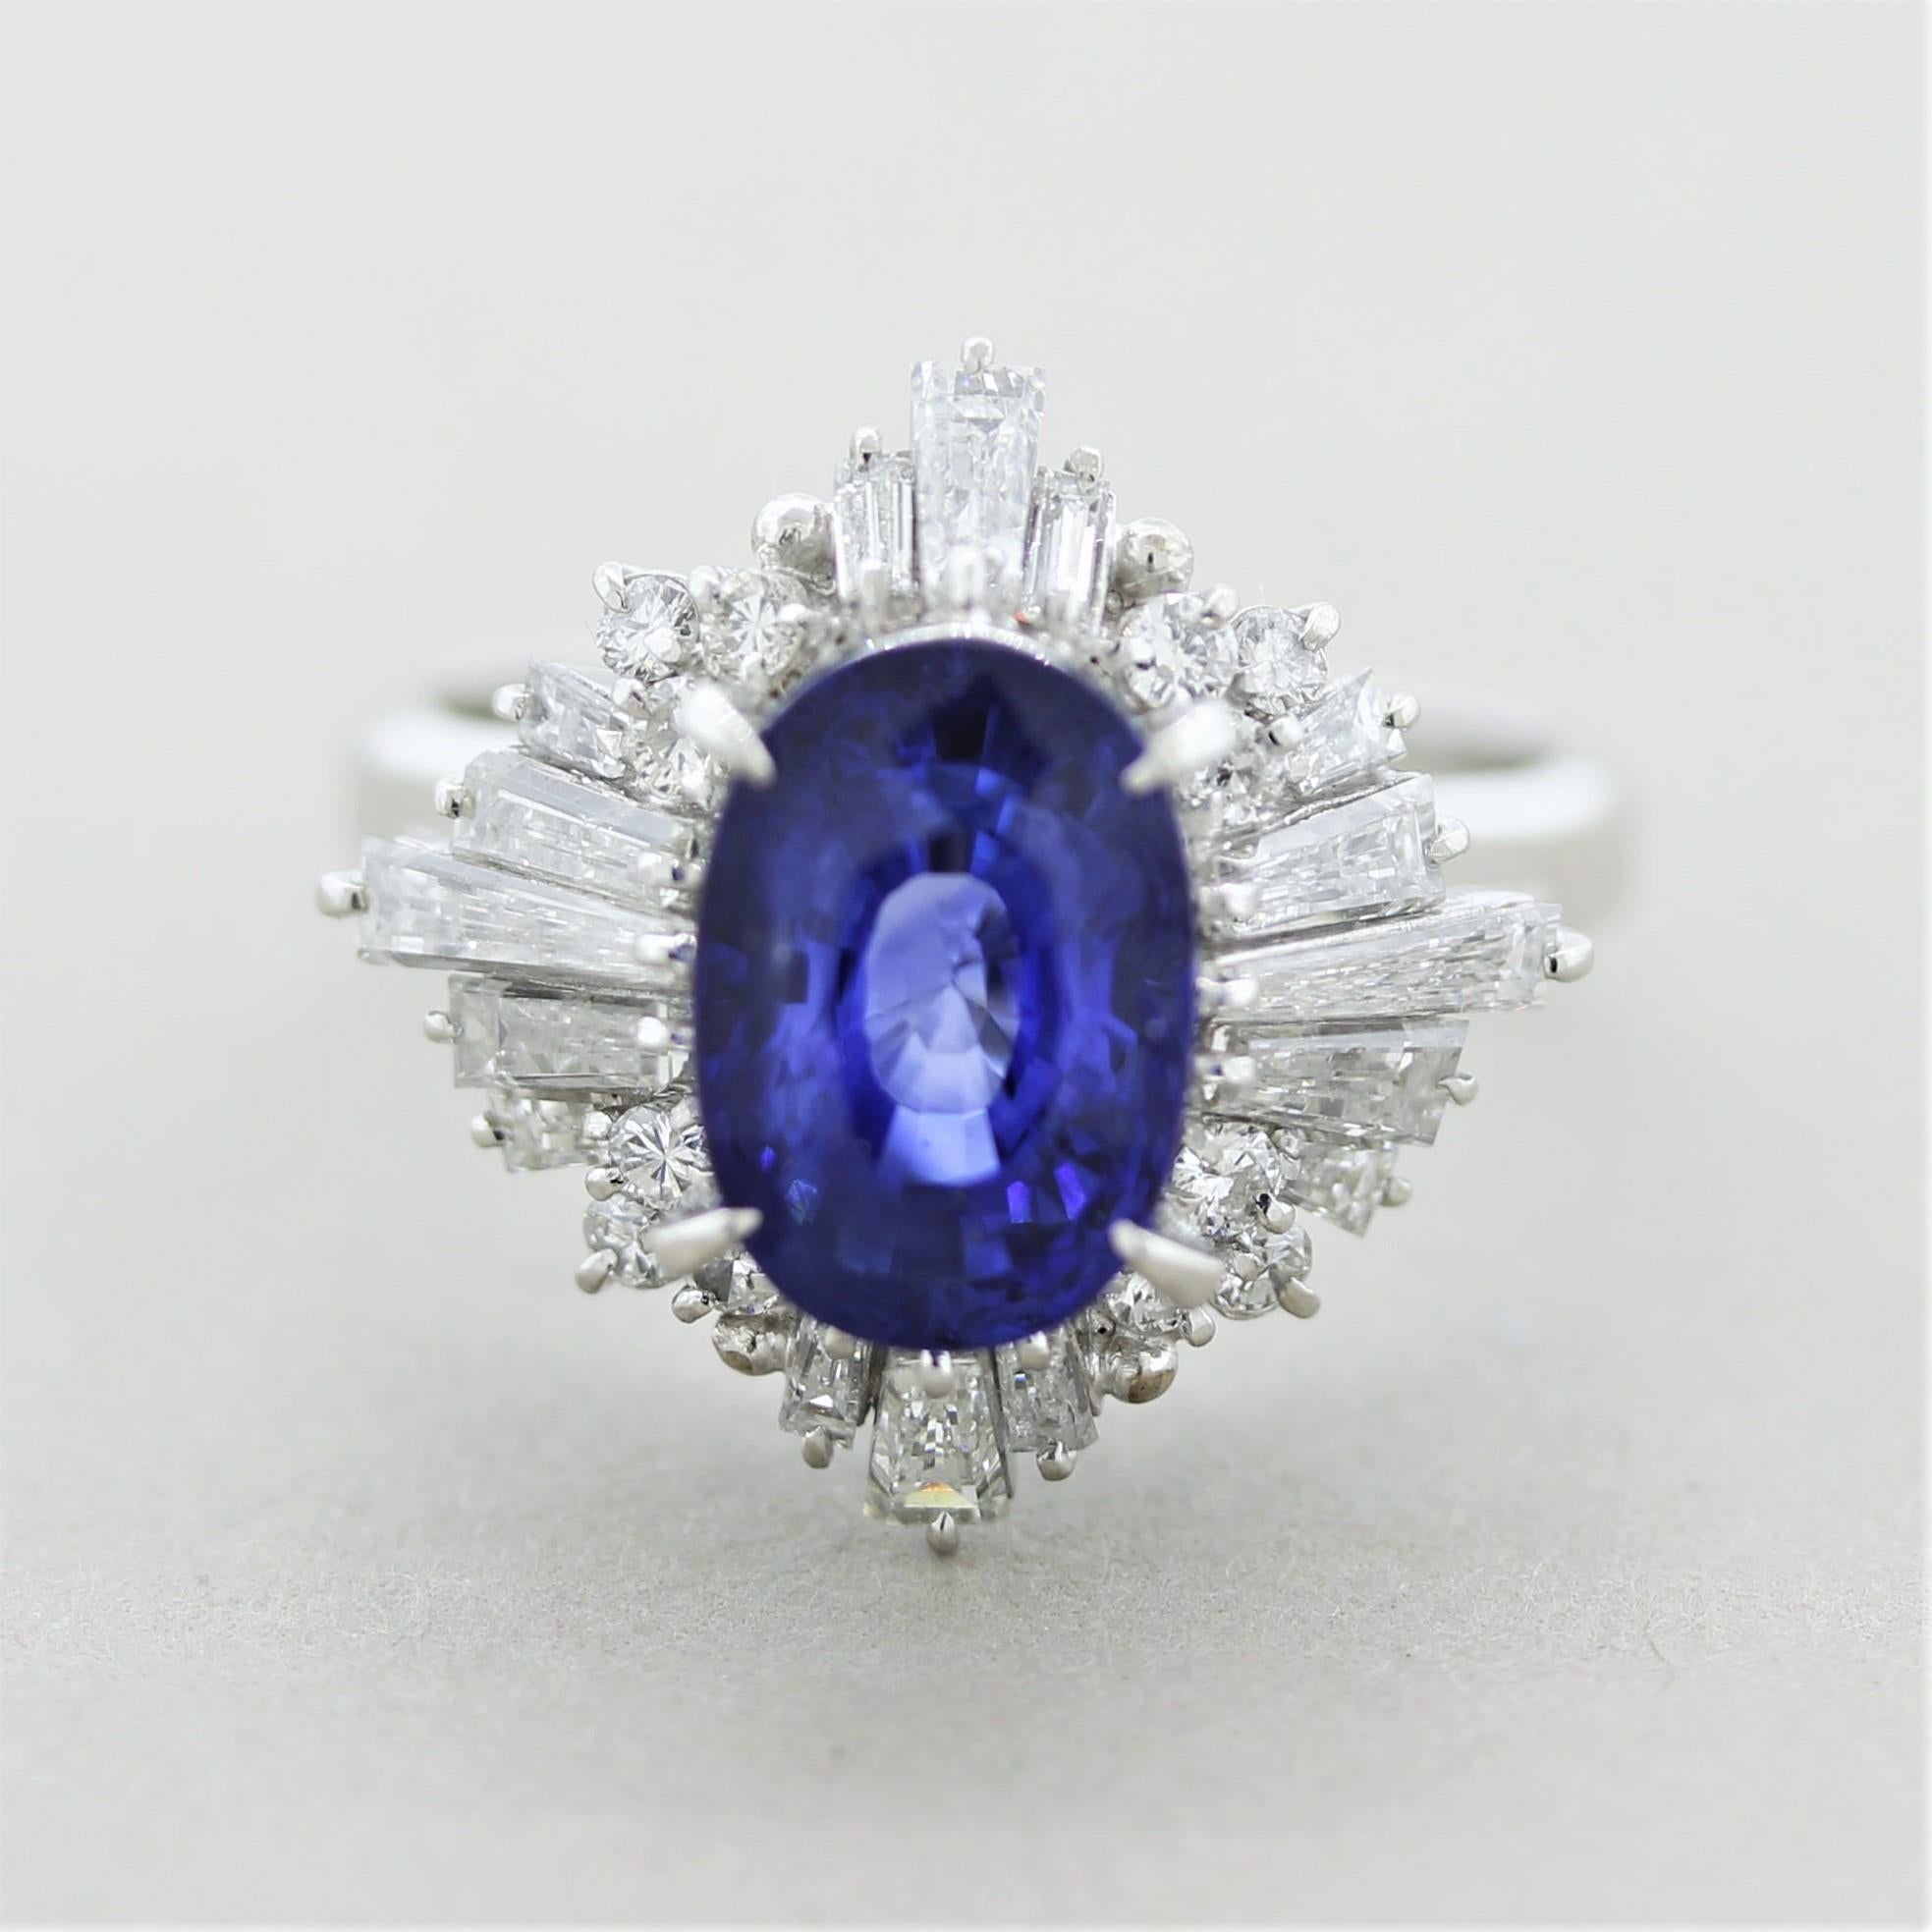 A bright and lively natural sapphire certified by the GIA! It weighs 4.08 carats and has a brilliant vivid-blue color that absolutely shines. It is accented by 1.44 carats of round brilliant-cut and baguette-cut diamonds set around the sapphire in a